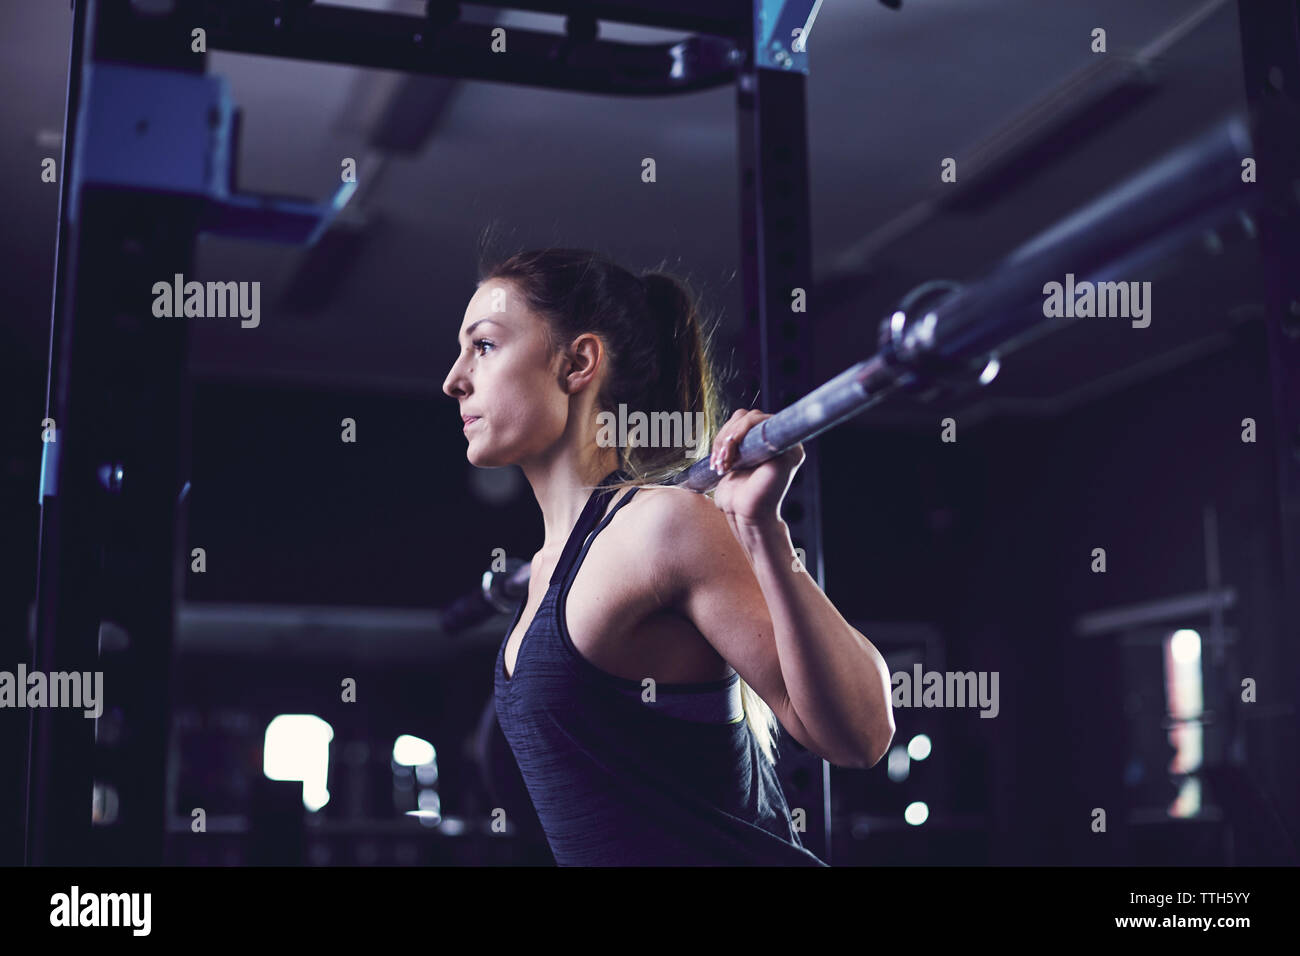 Portrait of young woman training at fitness centre with barbell. Stock Photo